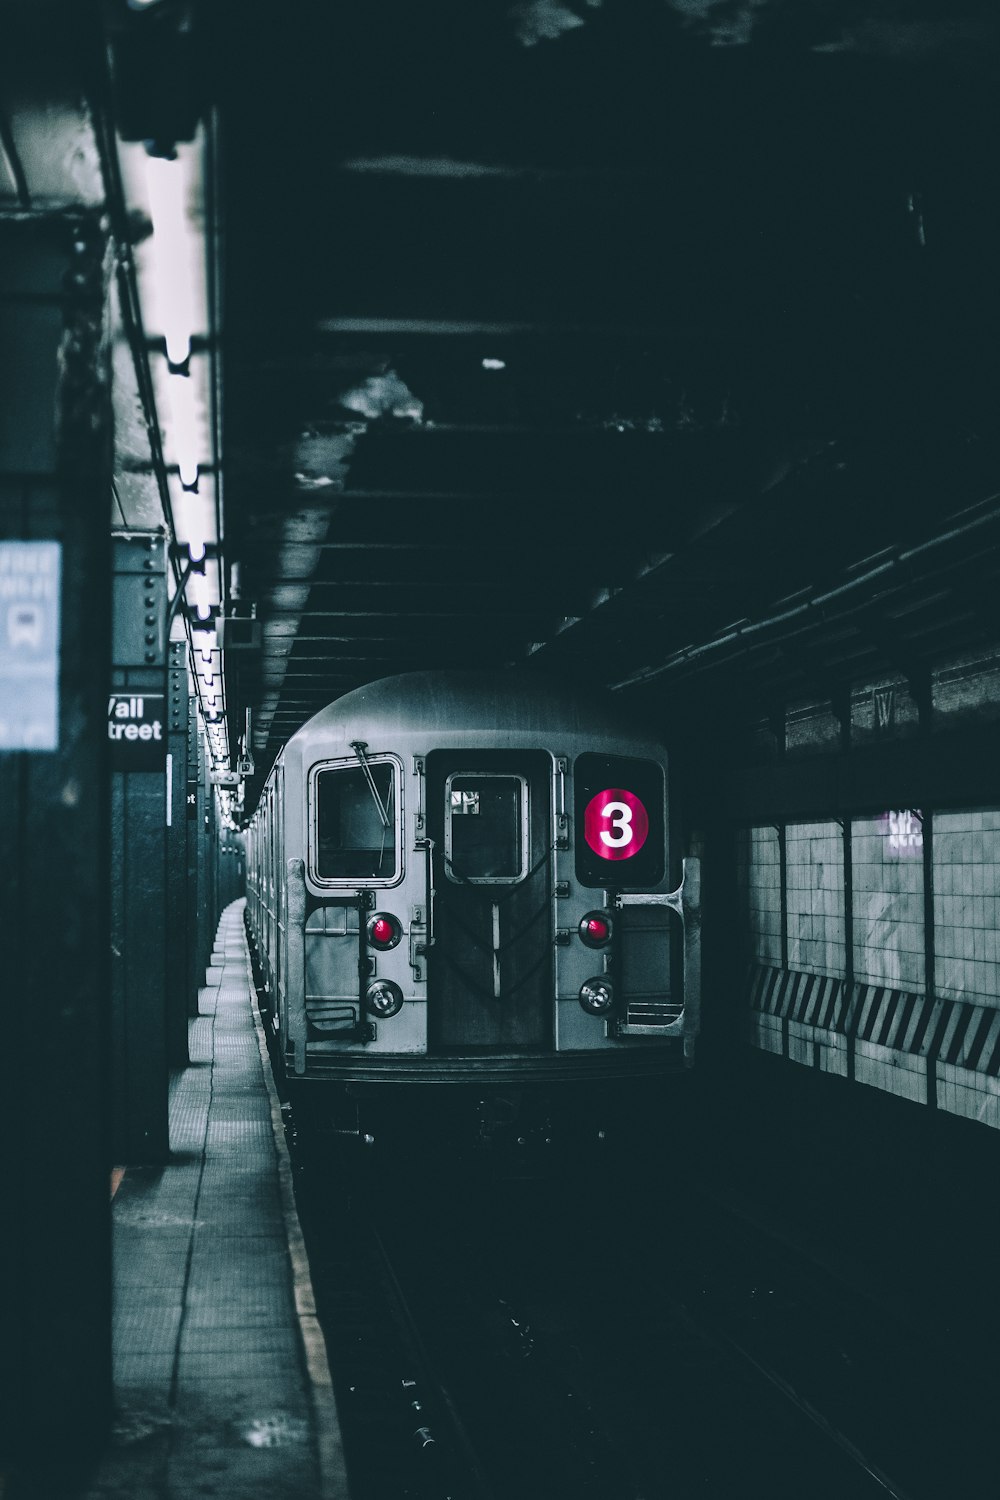 selective color photo of a subway station with train